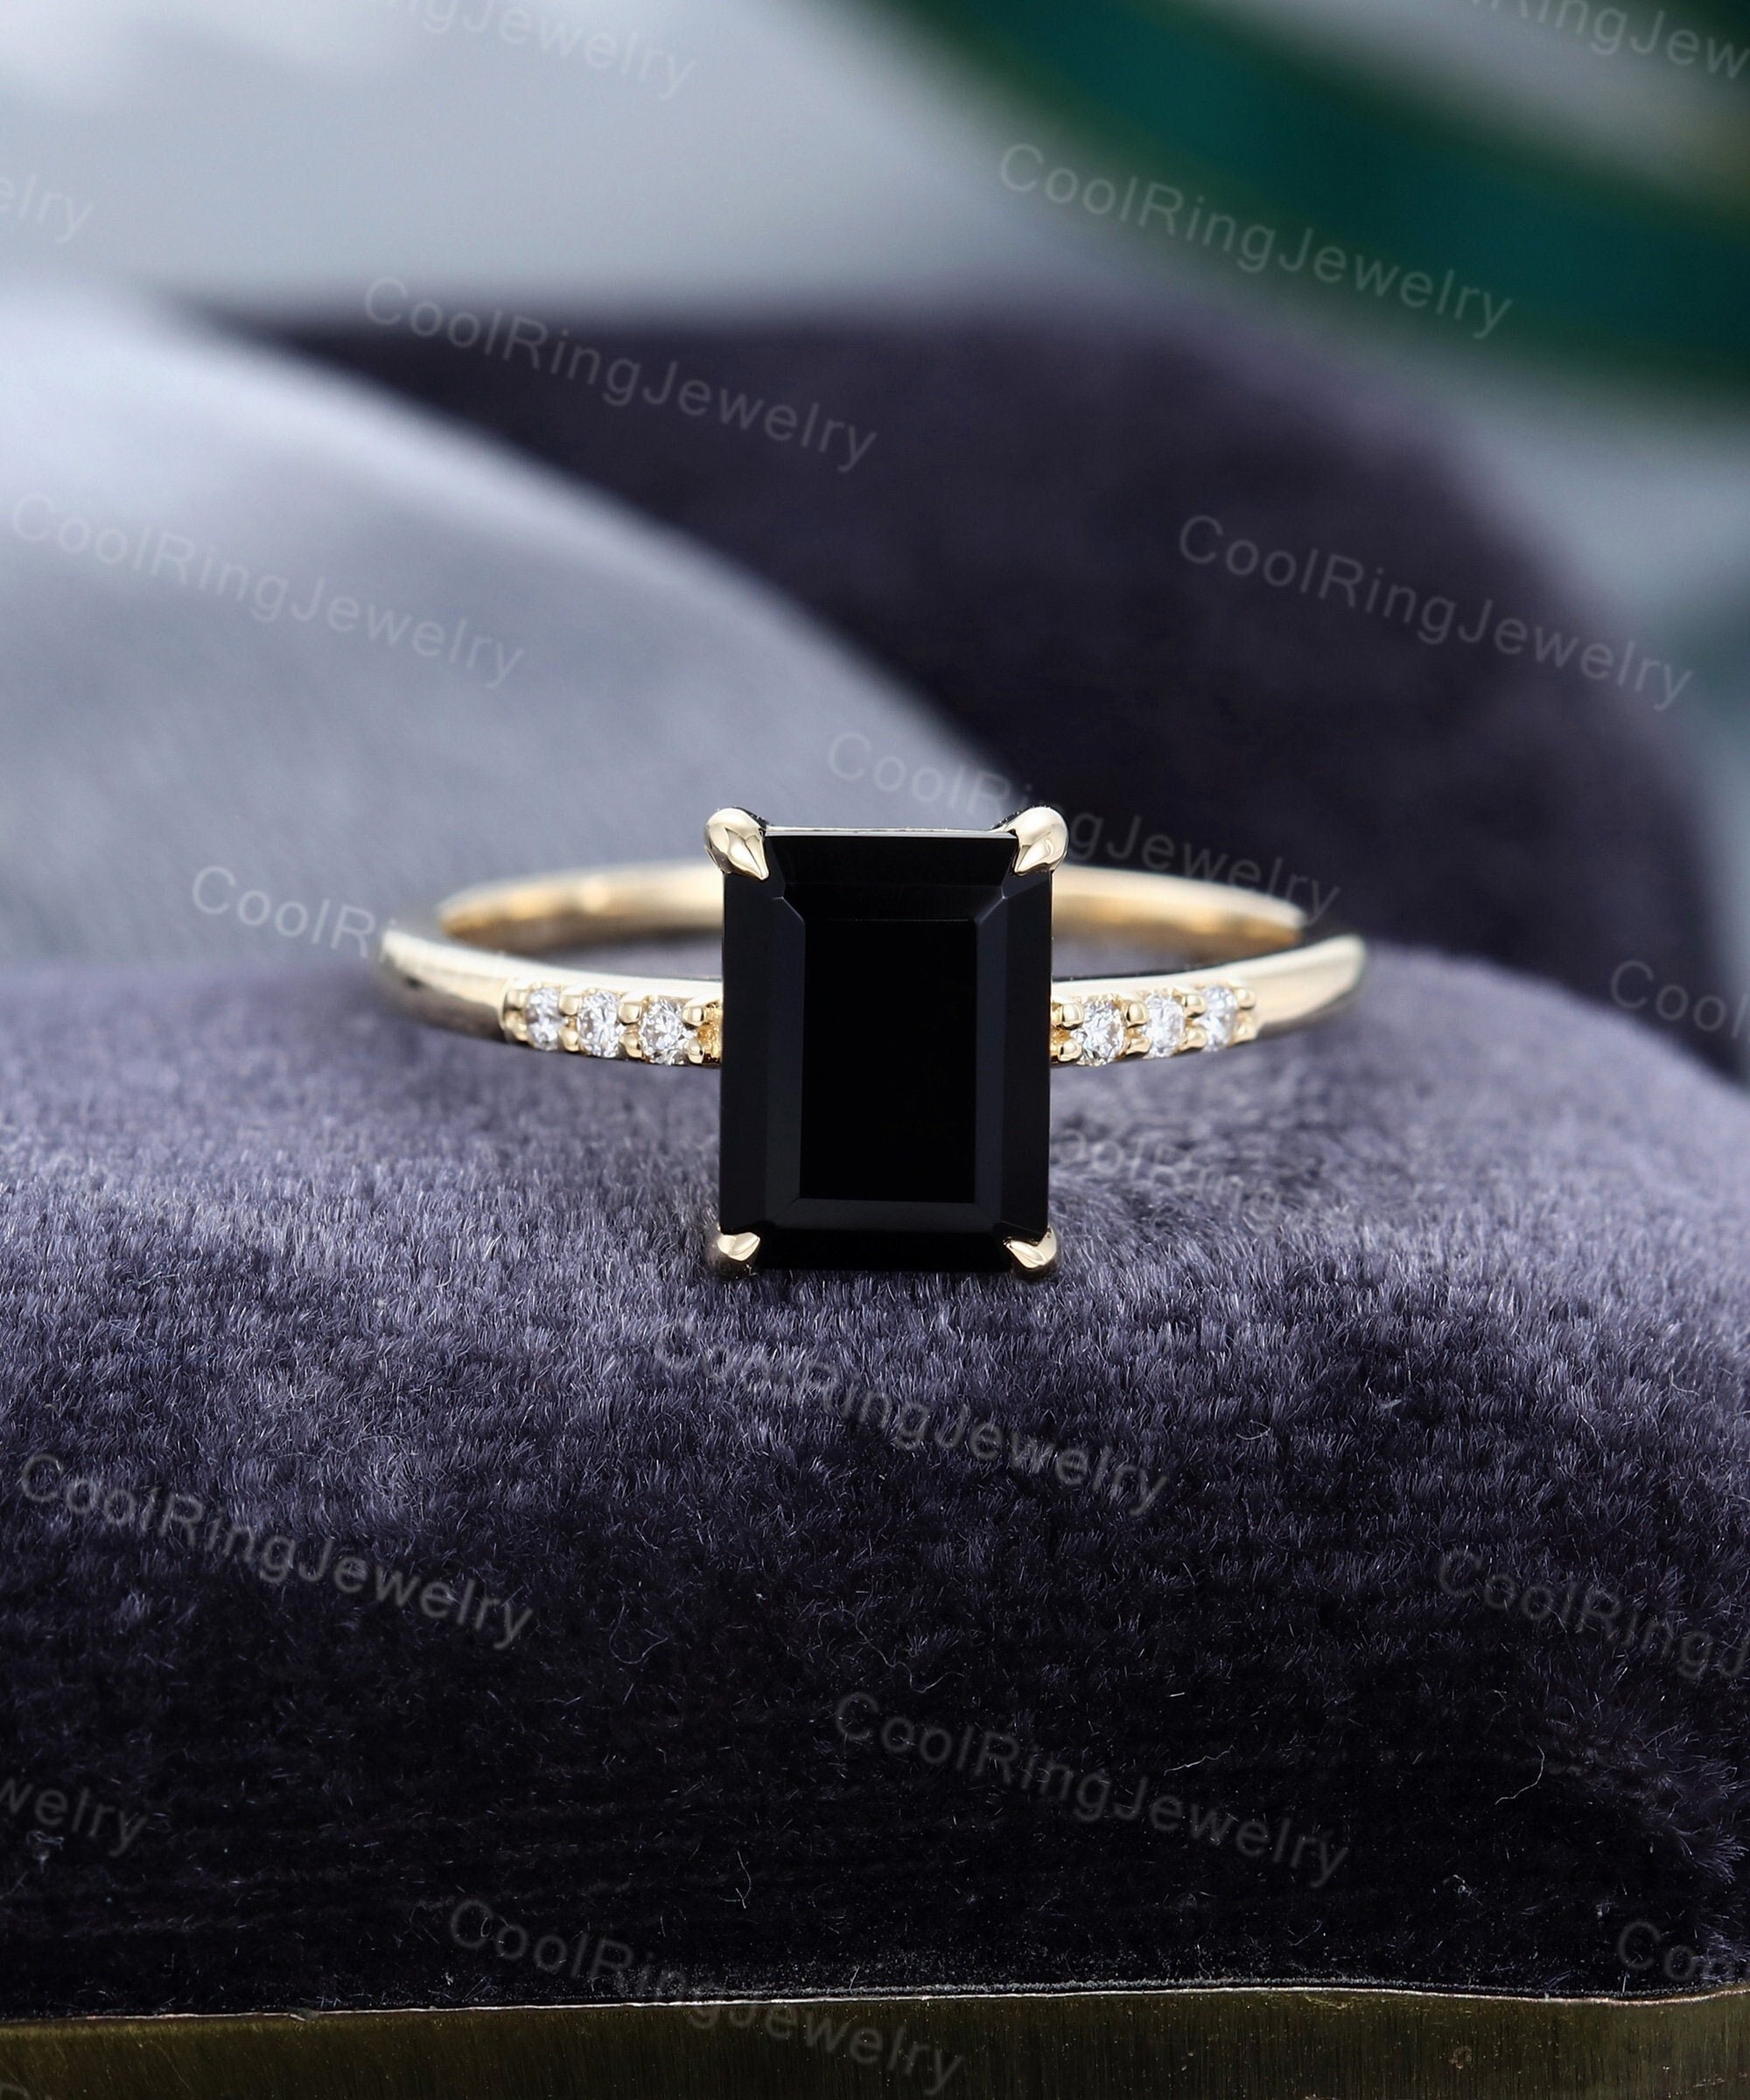 Female Sterling Silver Ring Jewelry With Semi Precious Black Onyx